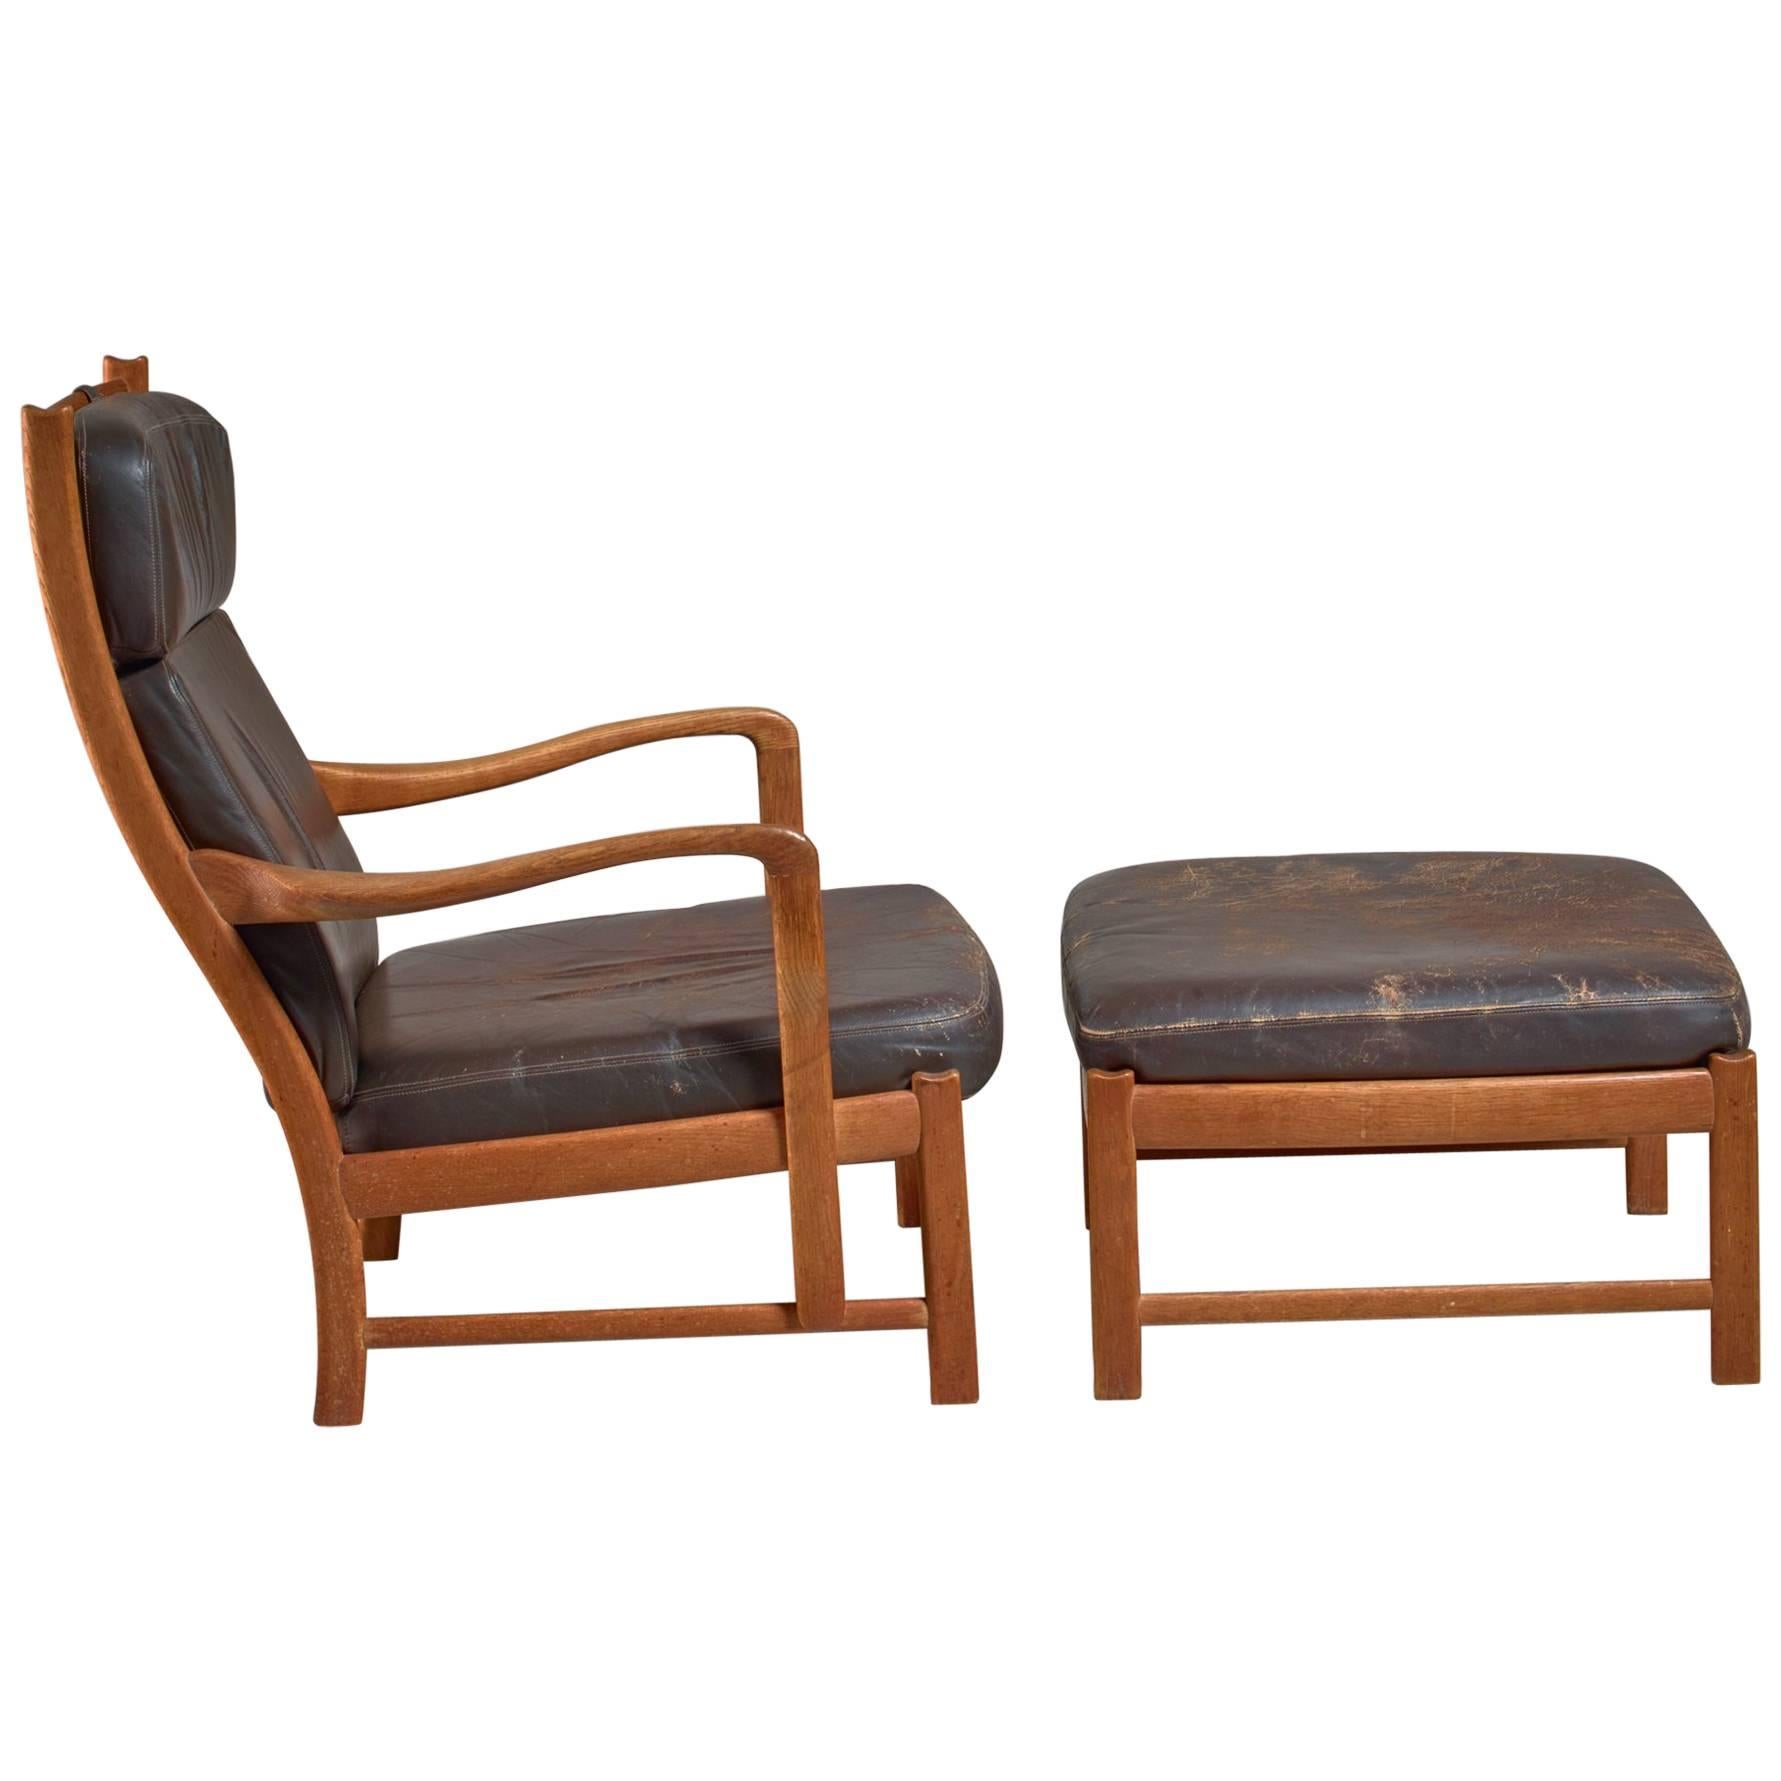 Scandinavian Oak and Brown Leather Lounger with Ottoman, 1950s For Sale